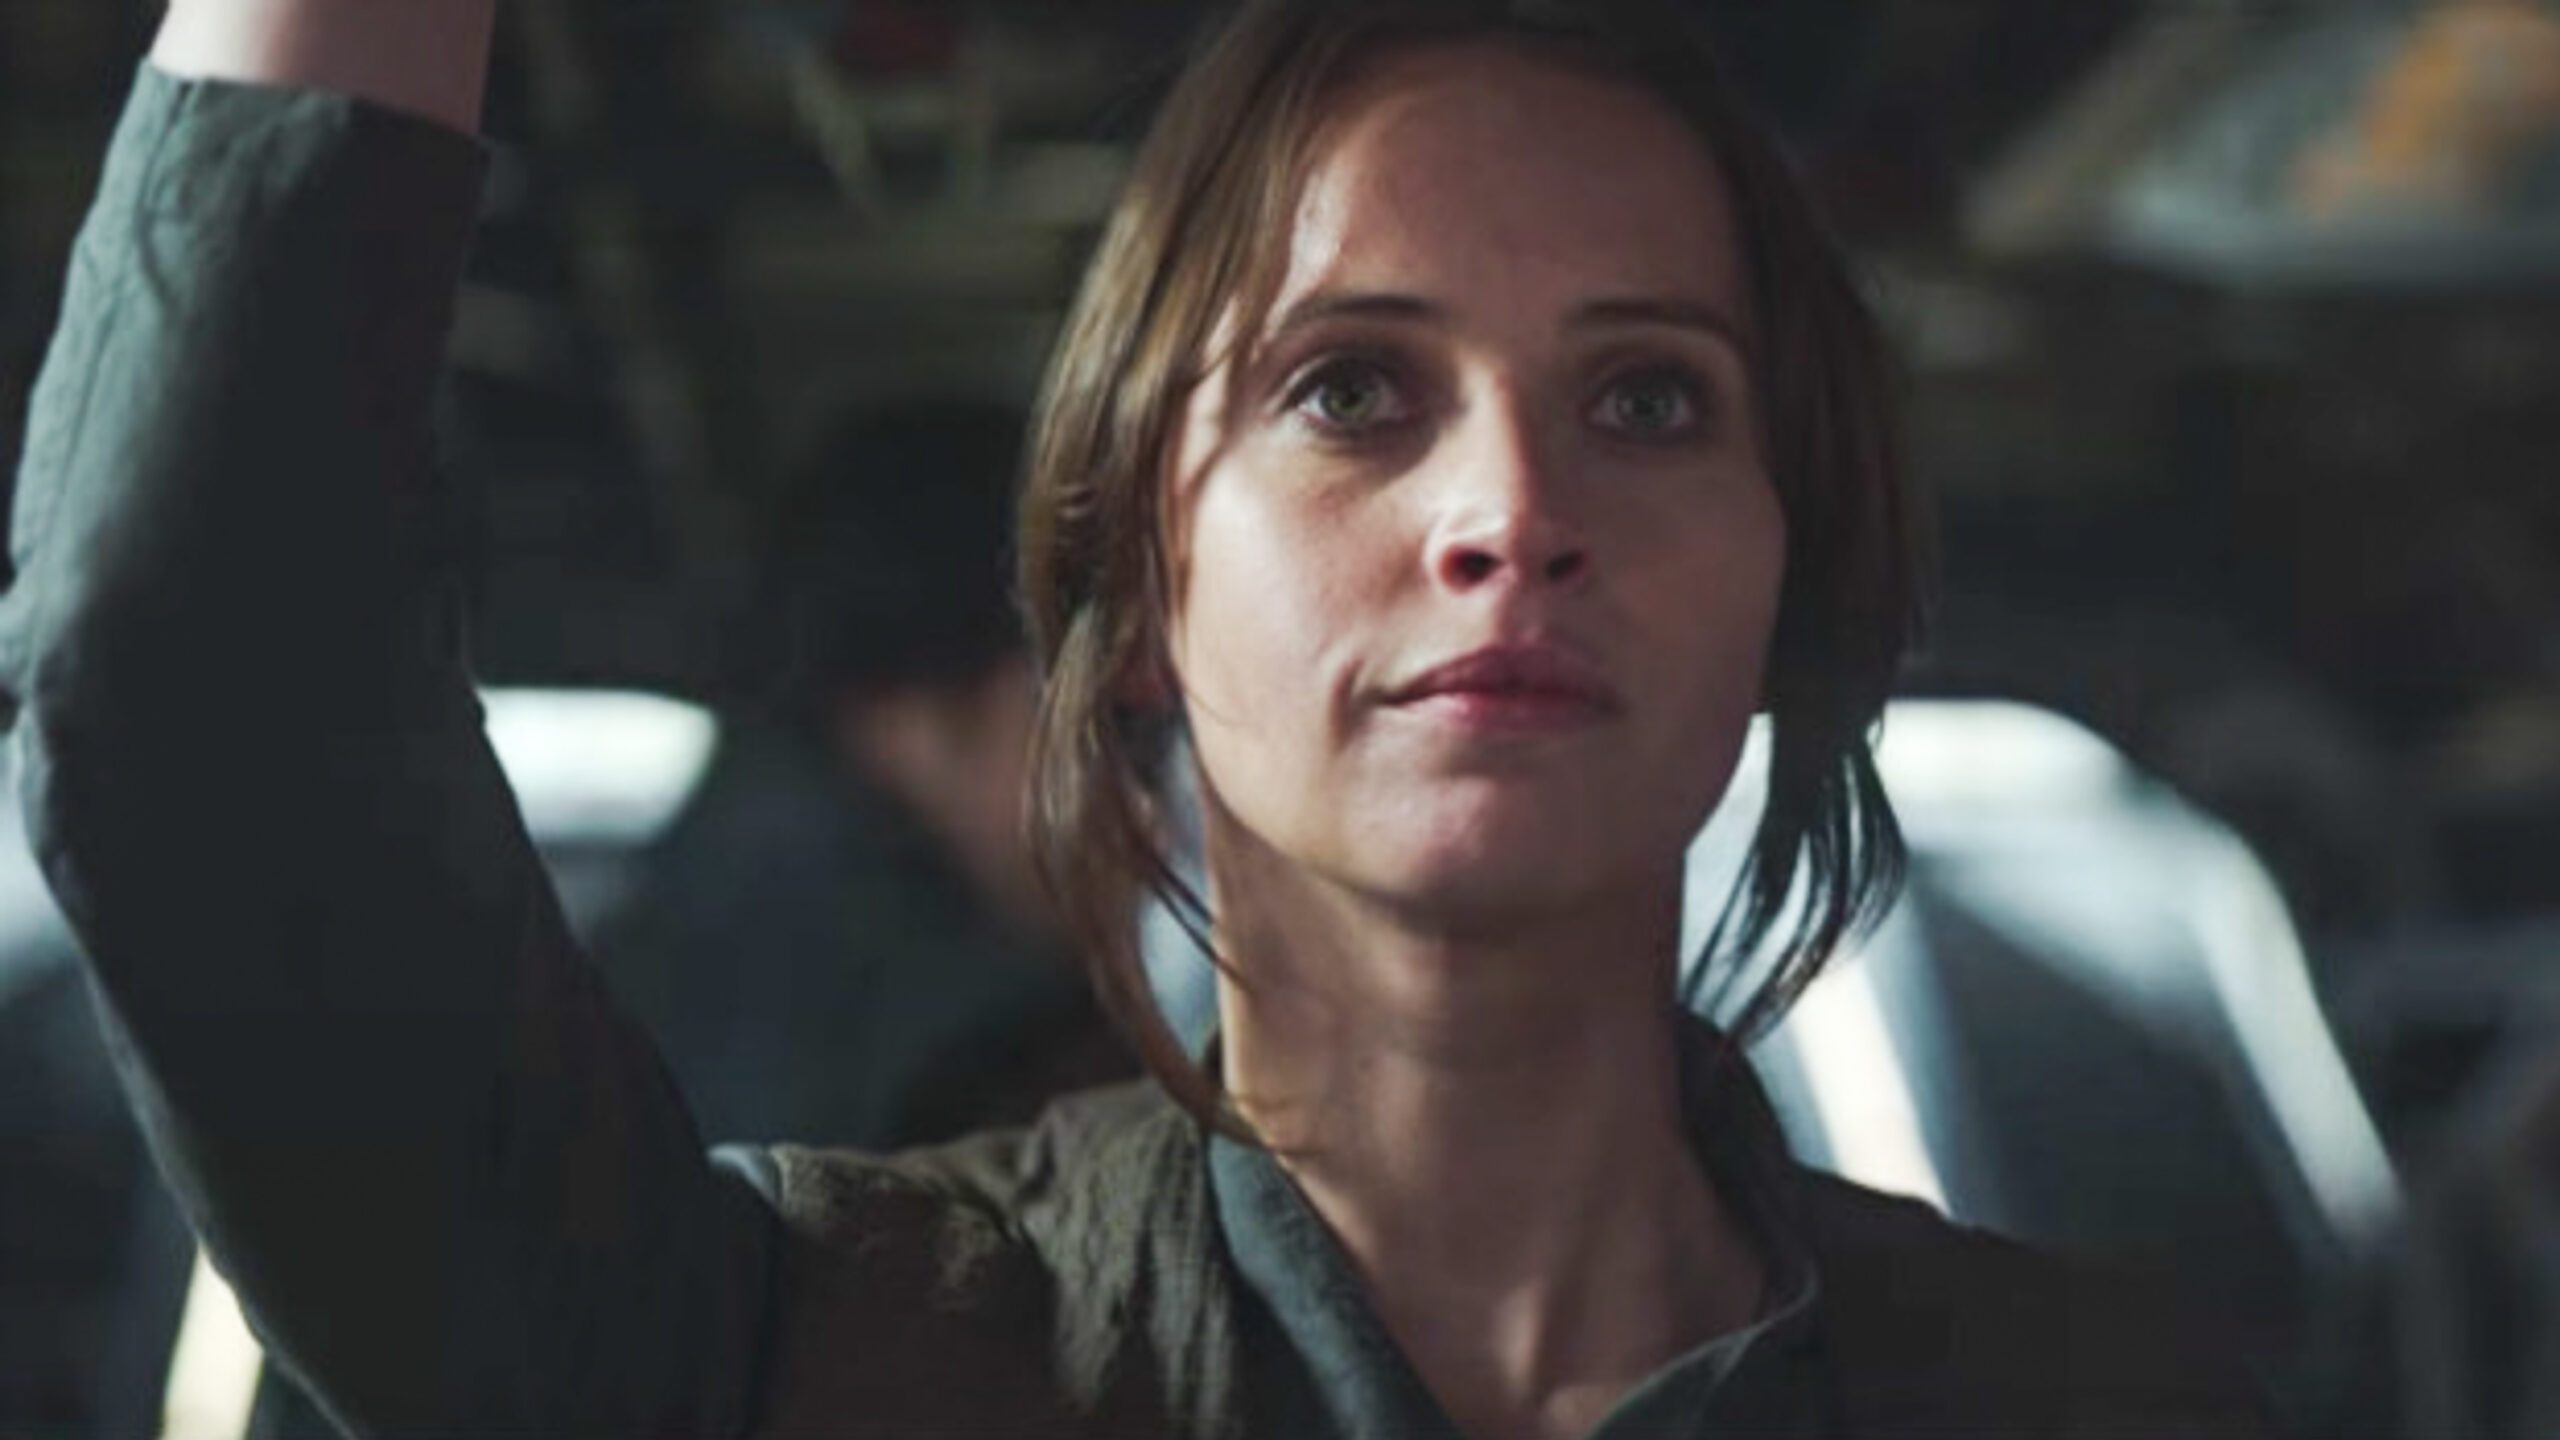 Wait nearly over for Star Wars fans as 'Rogue One' opens